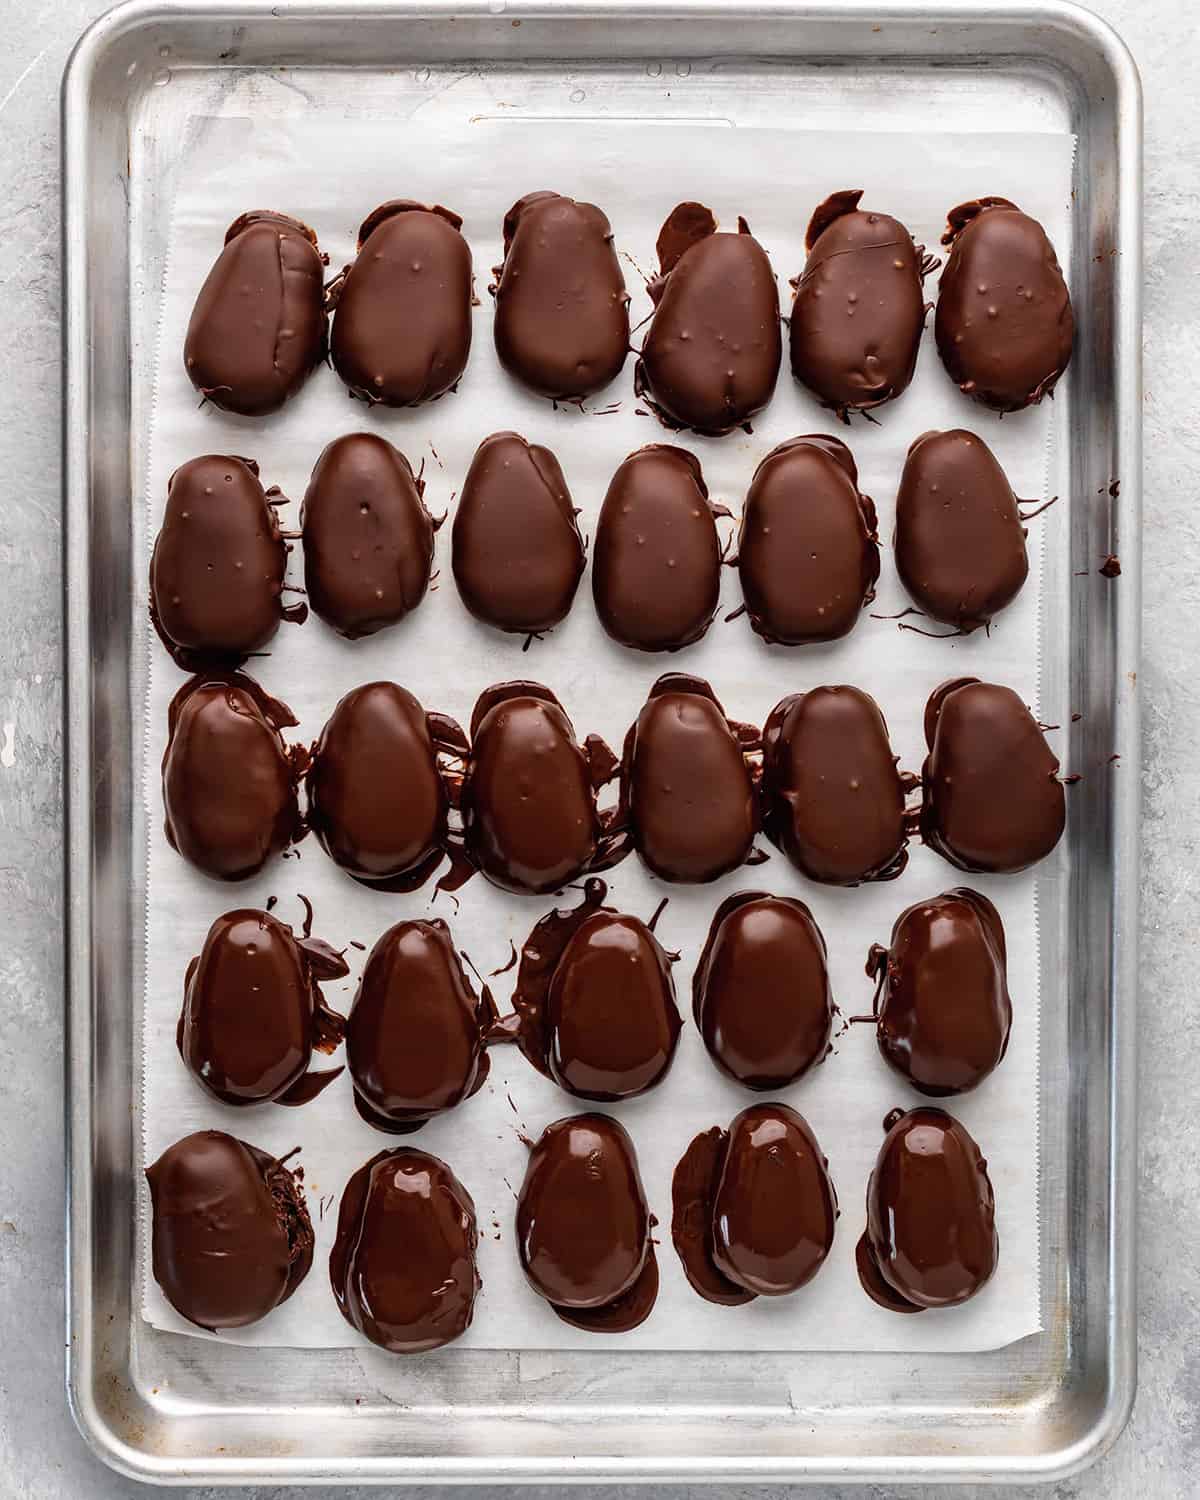 28 peanut butter eggs on a baking sheet right after they've been dipped in chocolate